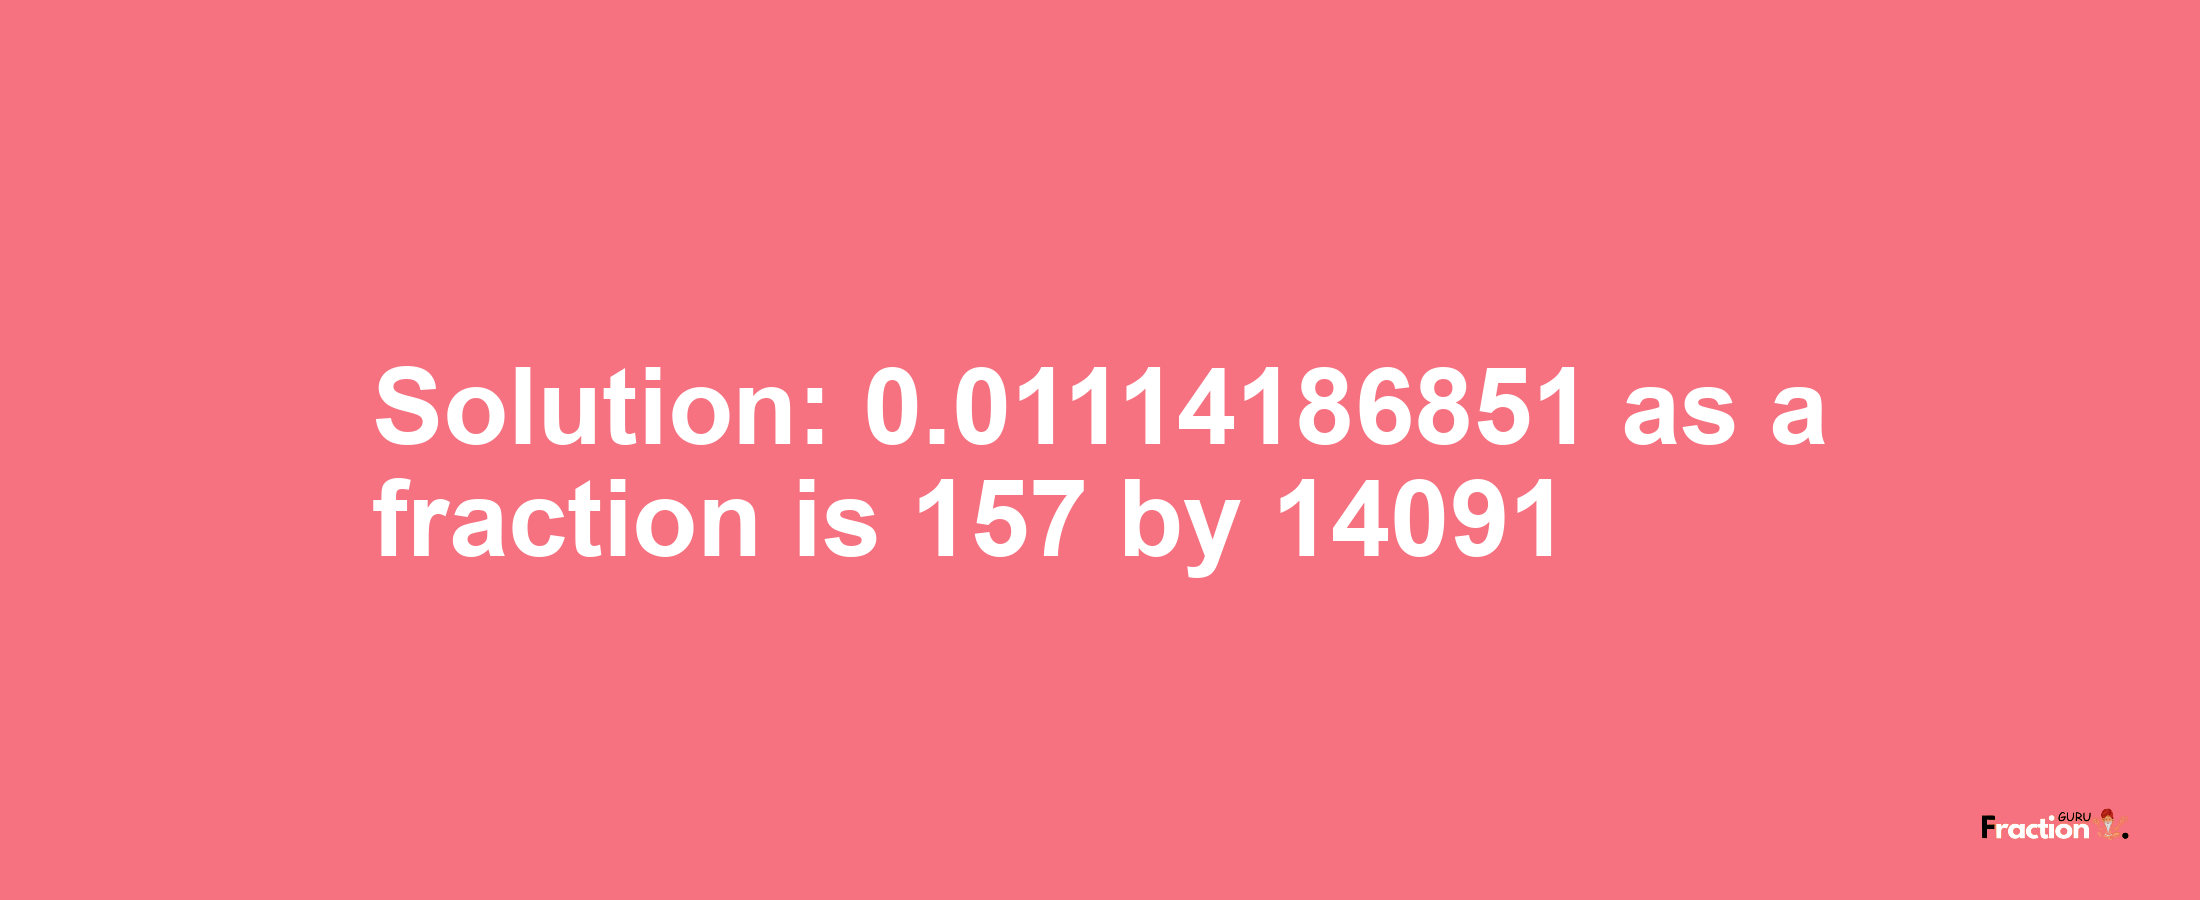 Solution:0.01114186851 as a fraction is 157/14091